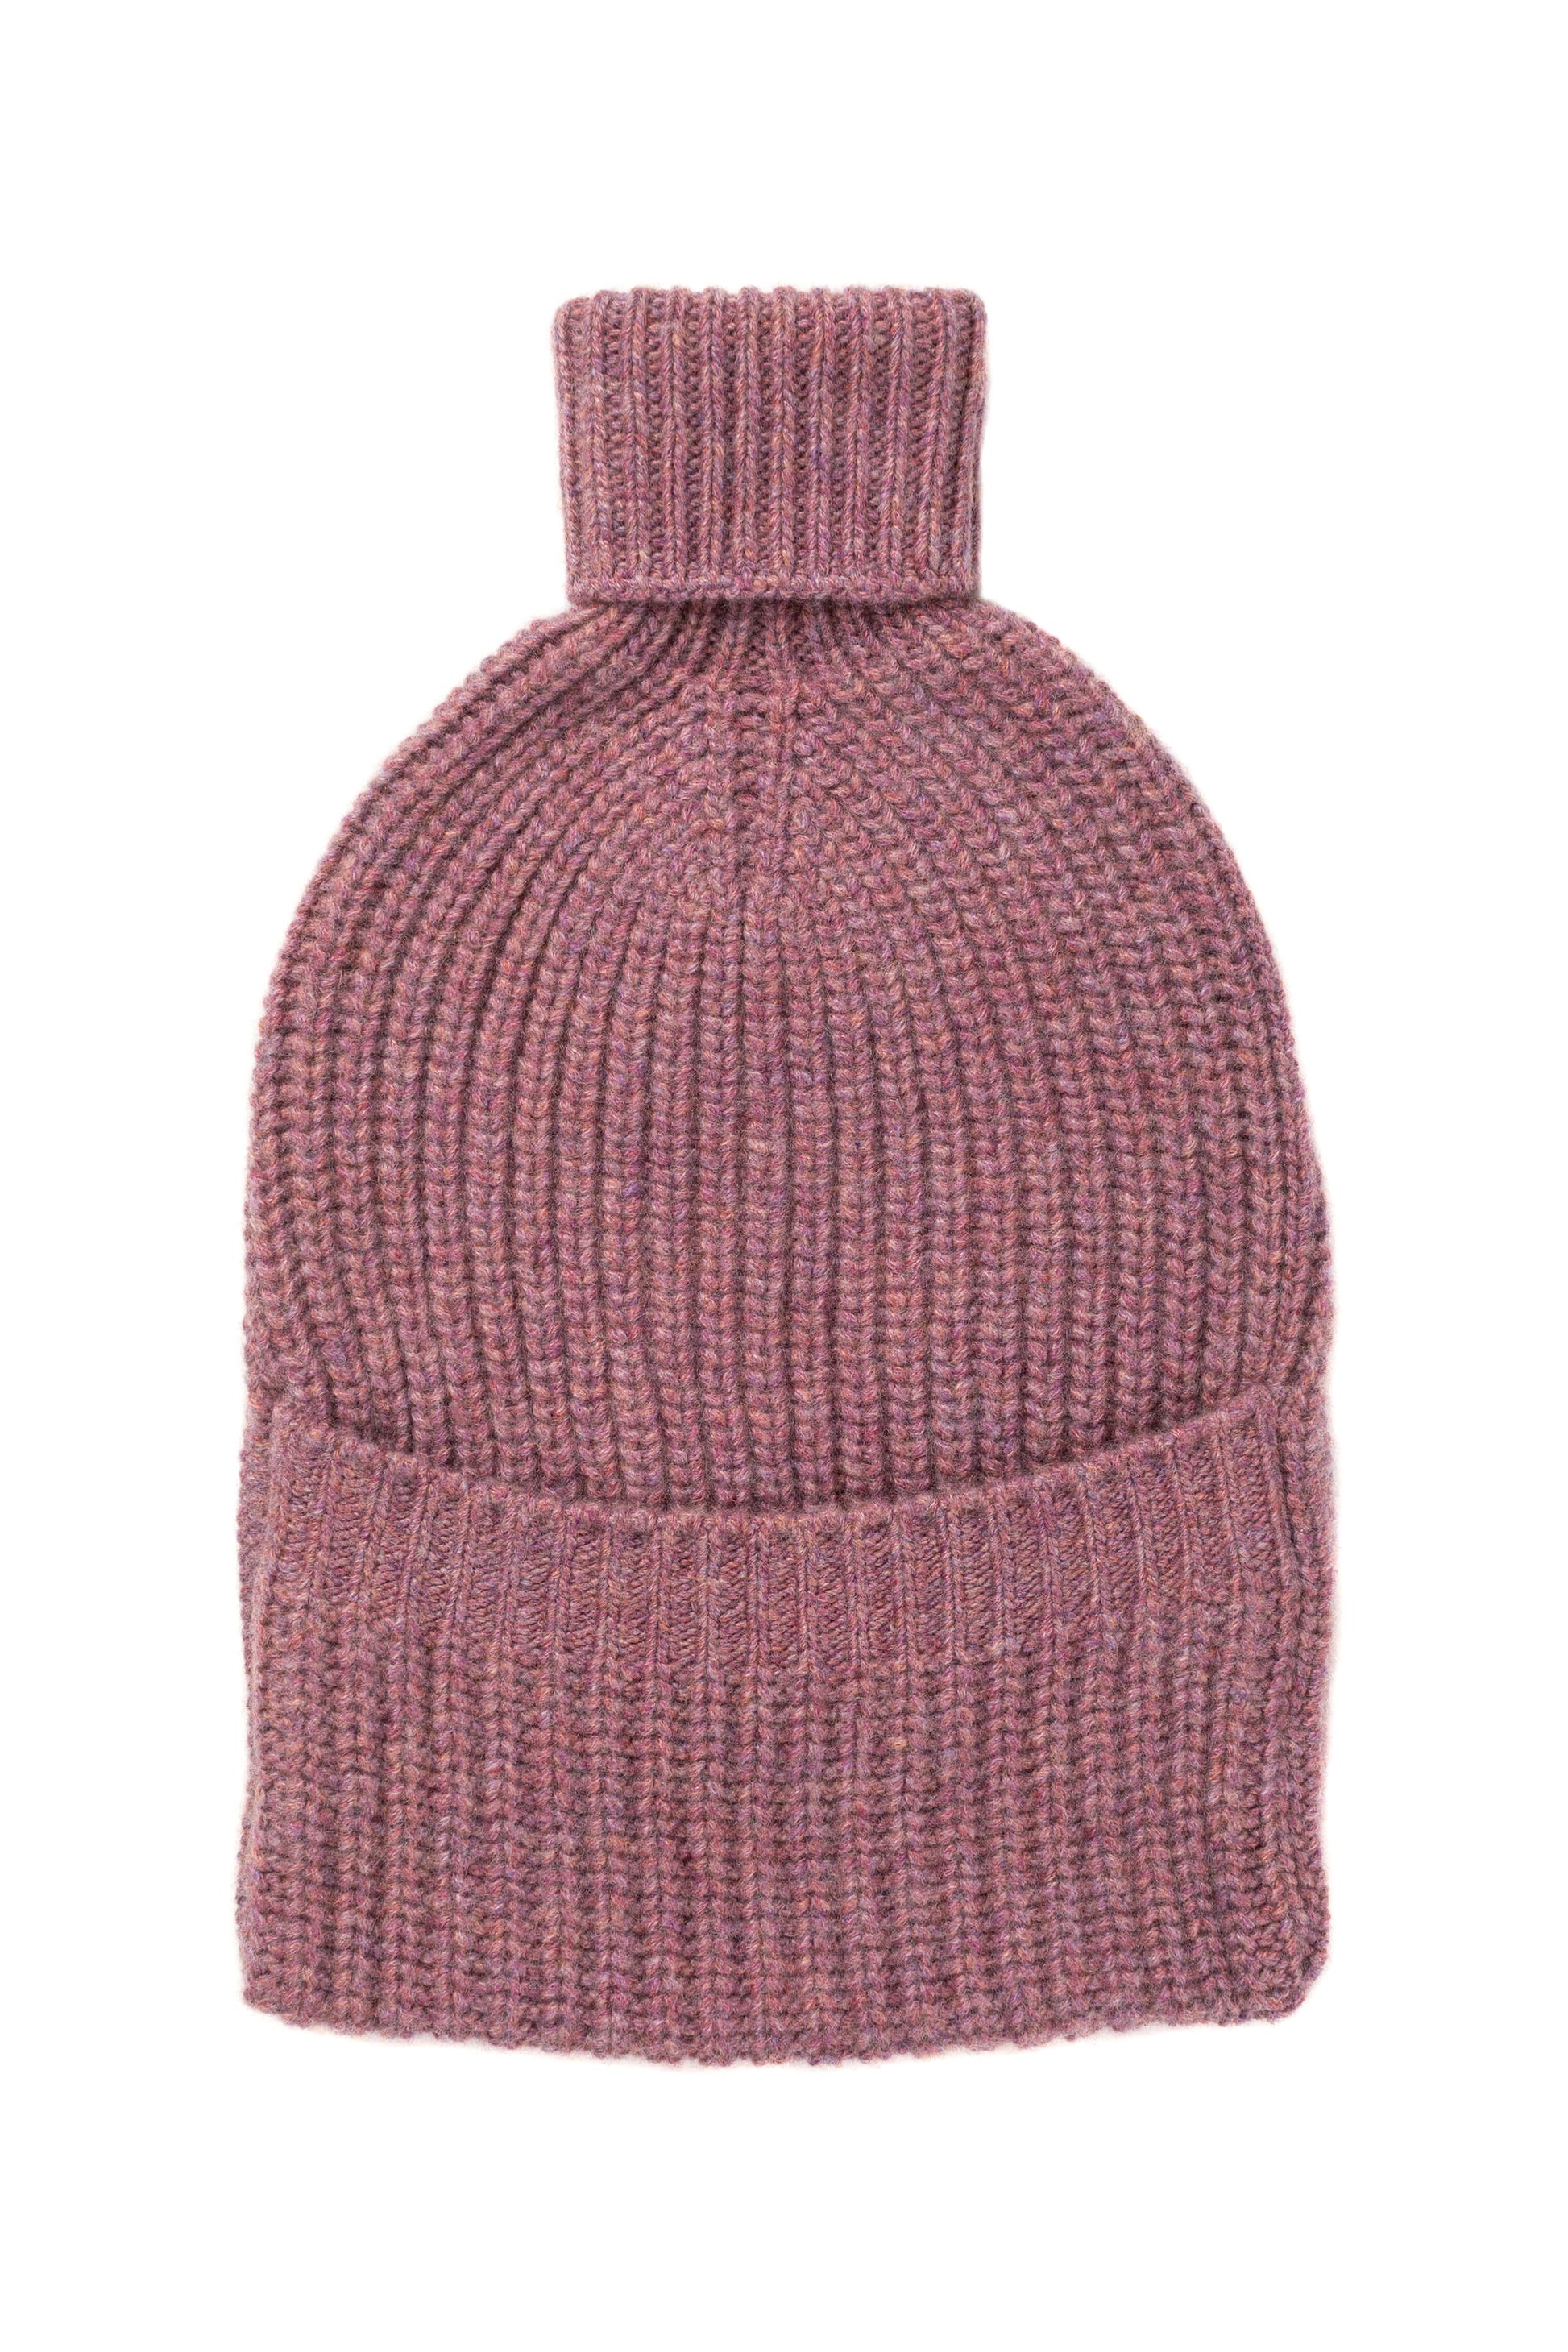 Johnstons of Elgin Cashmere Accessories Heather Purple Ribbed Cashmere Hot Water Bottle PA000062HE4307